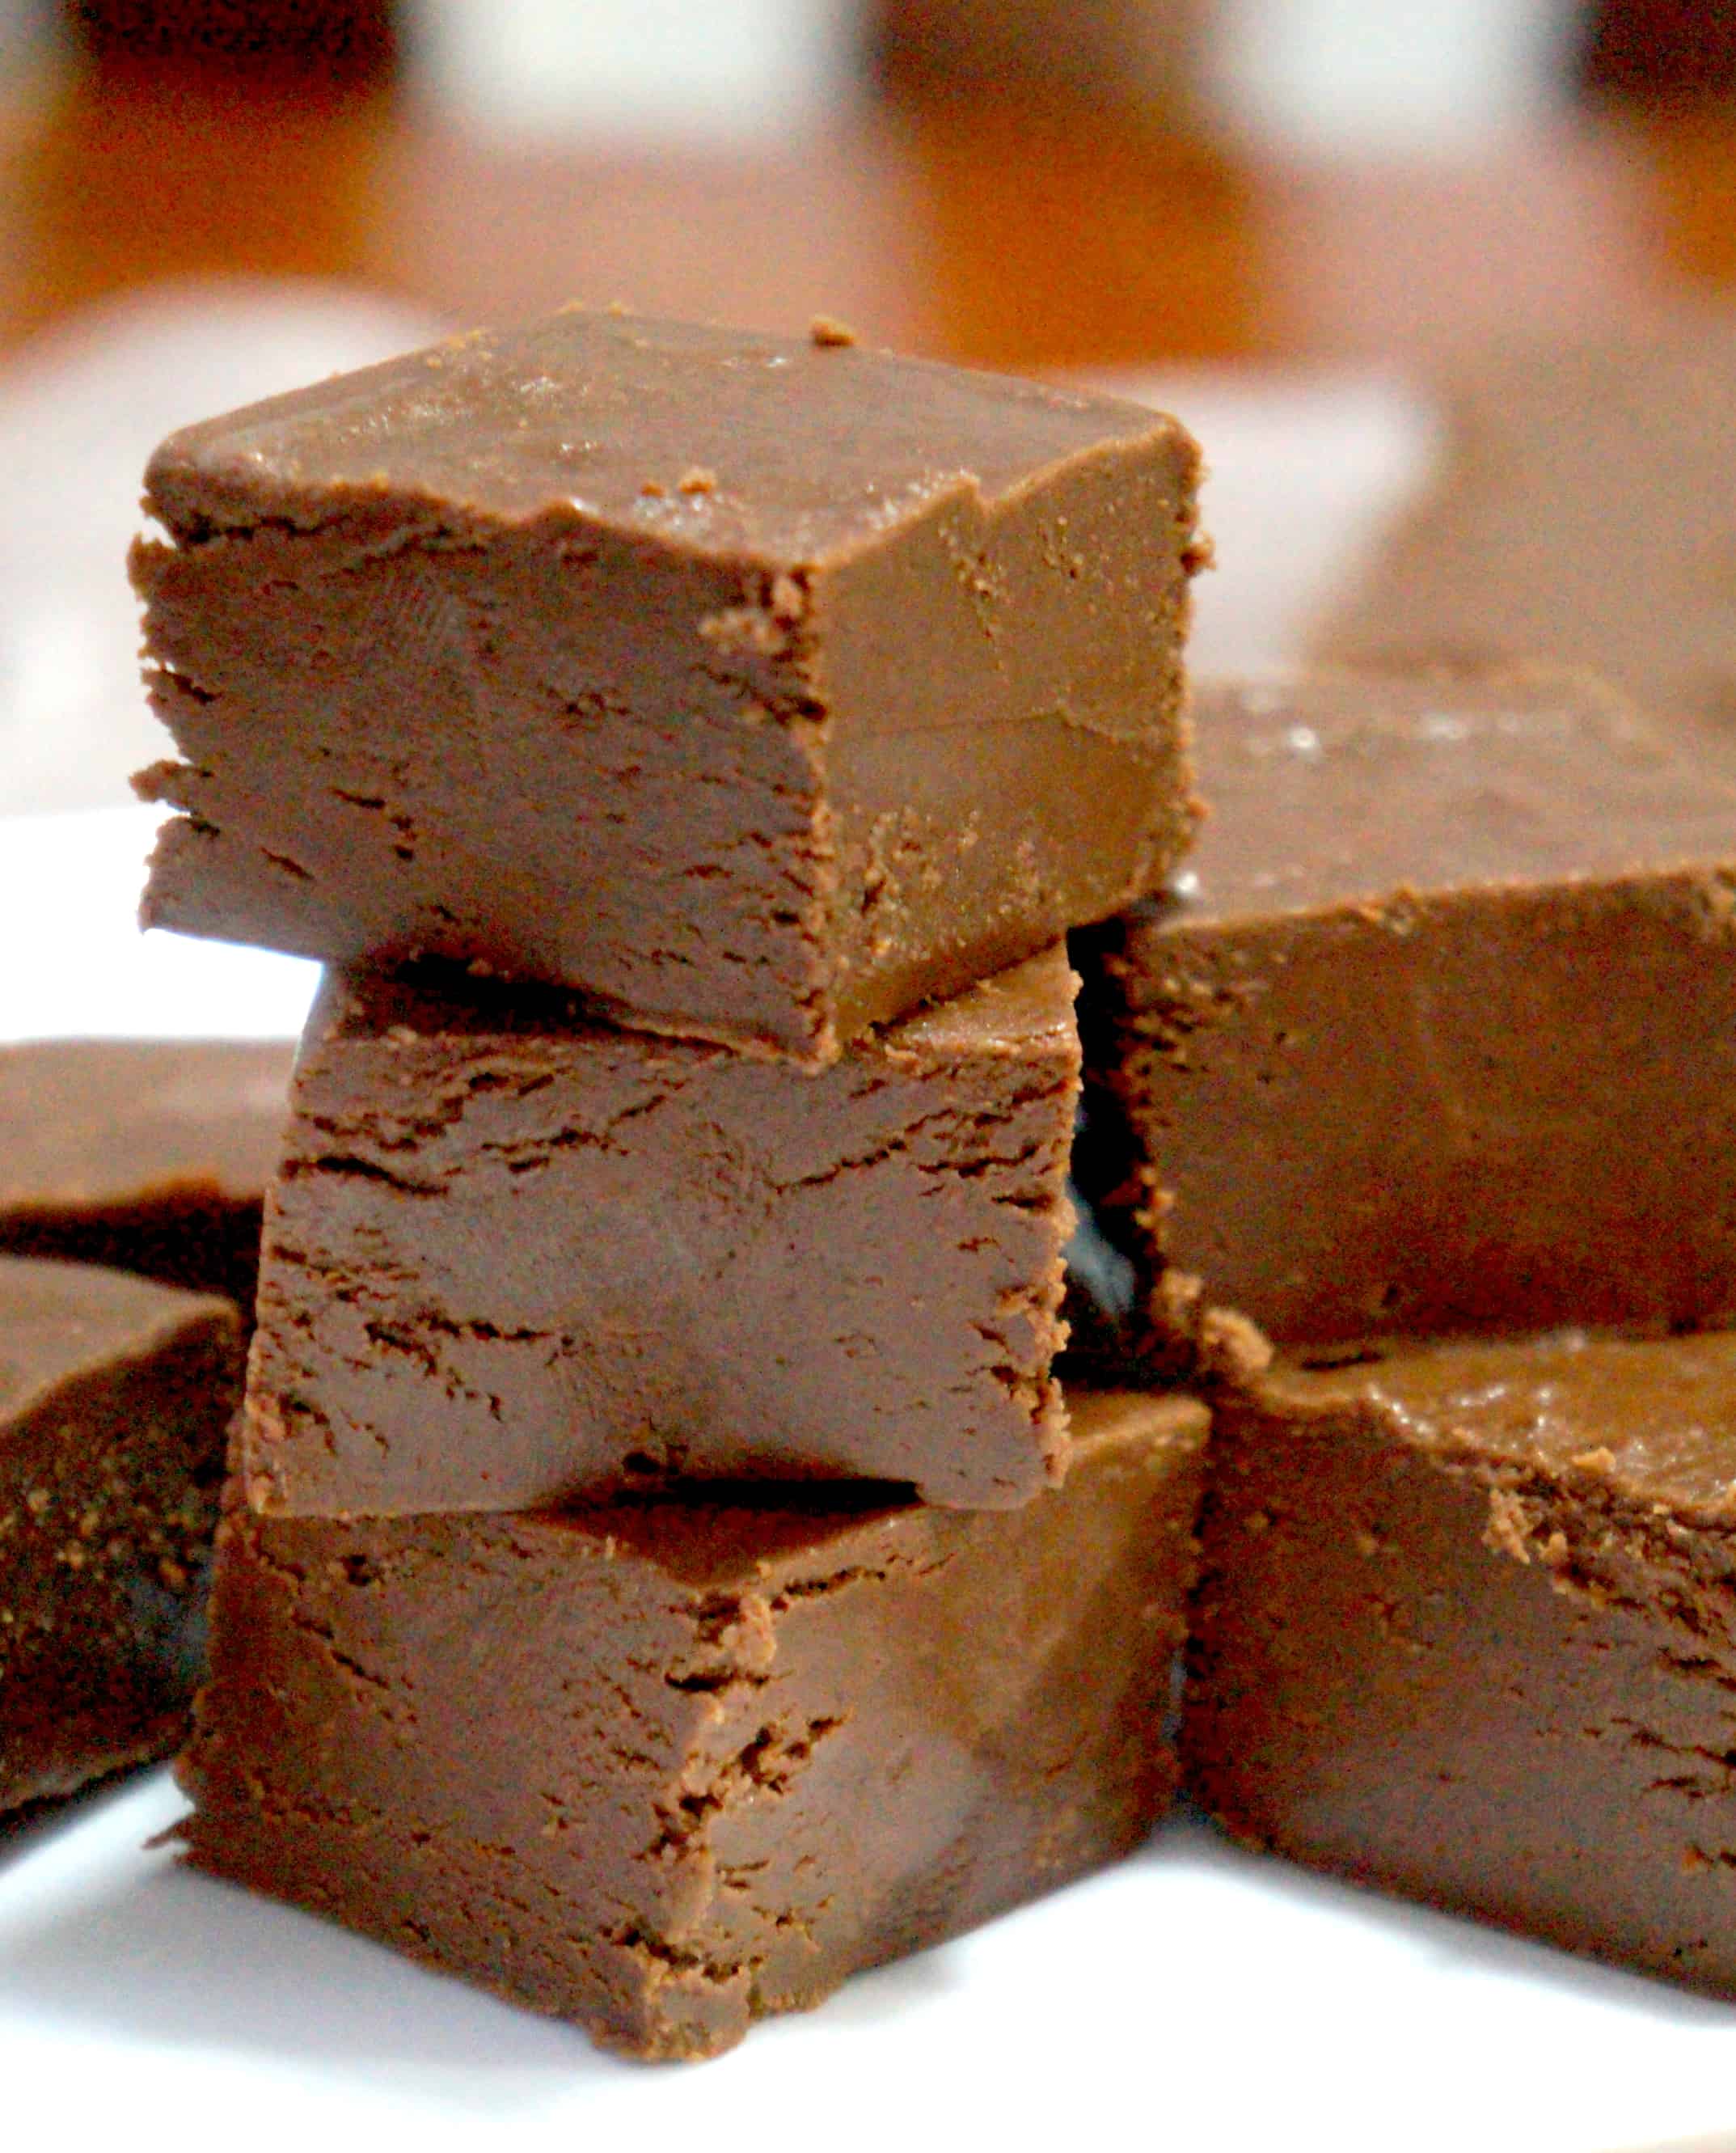 Chocolate peanut butter fudge stacked